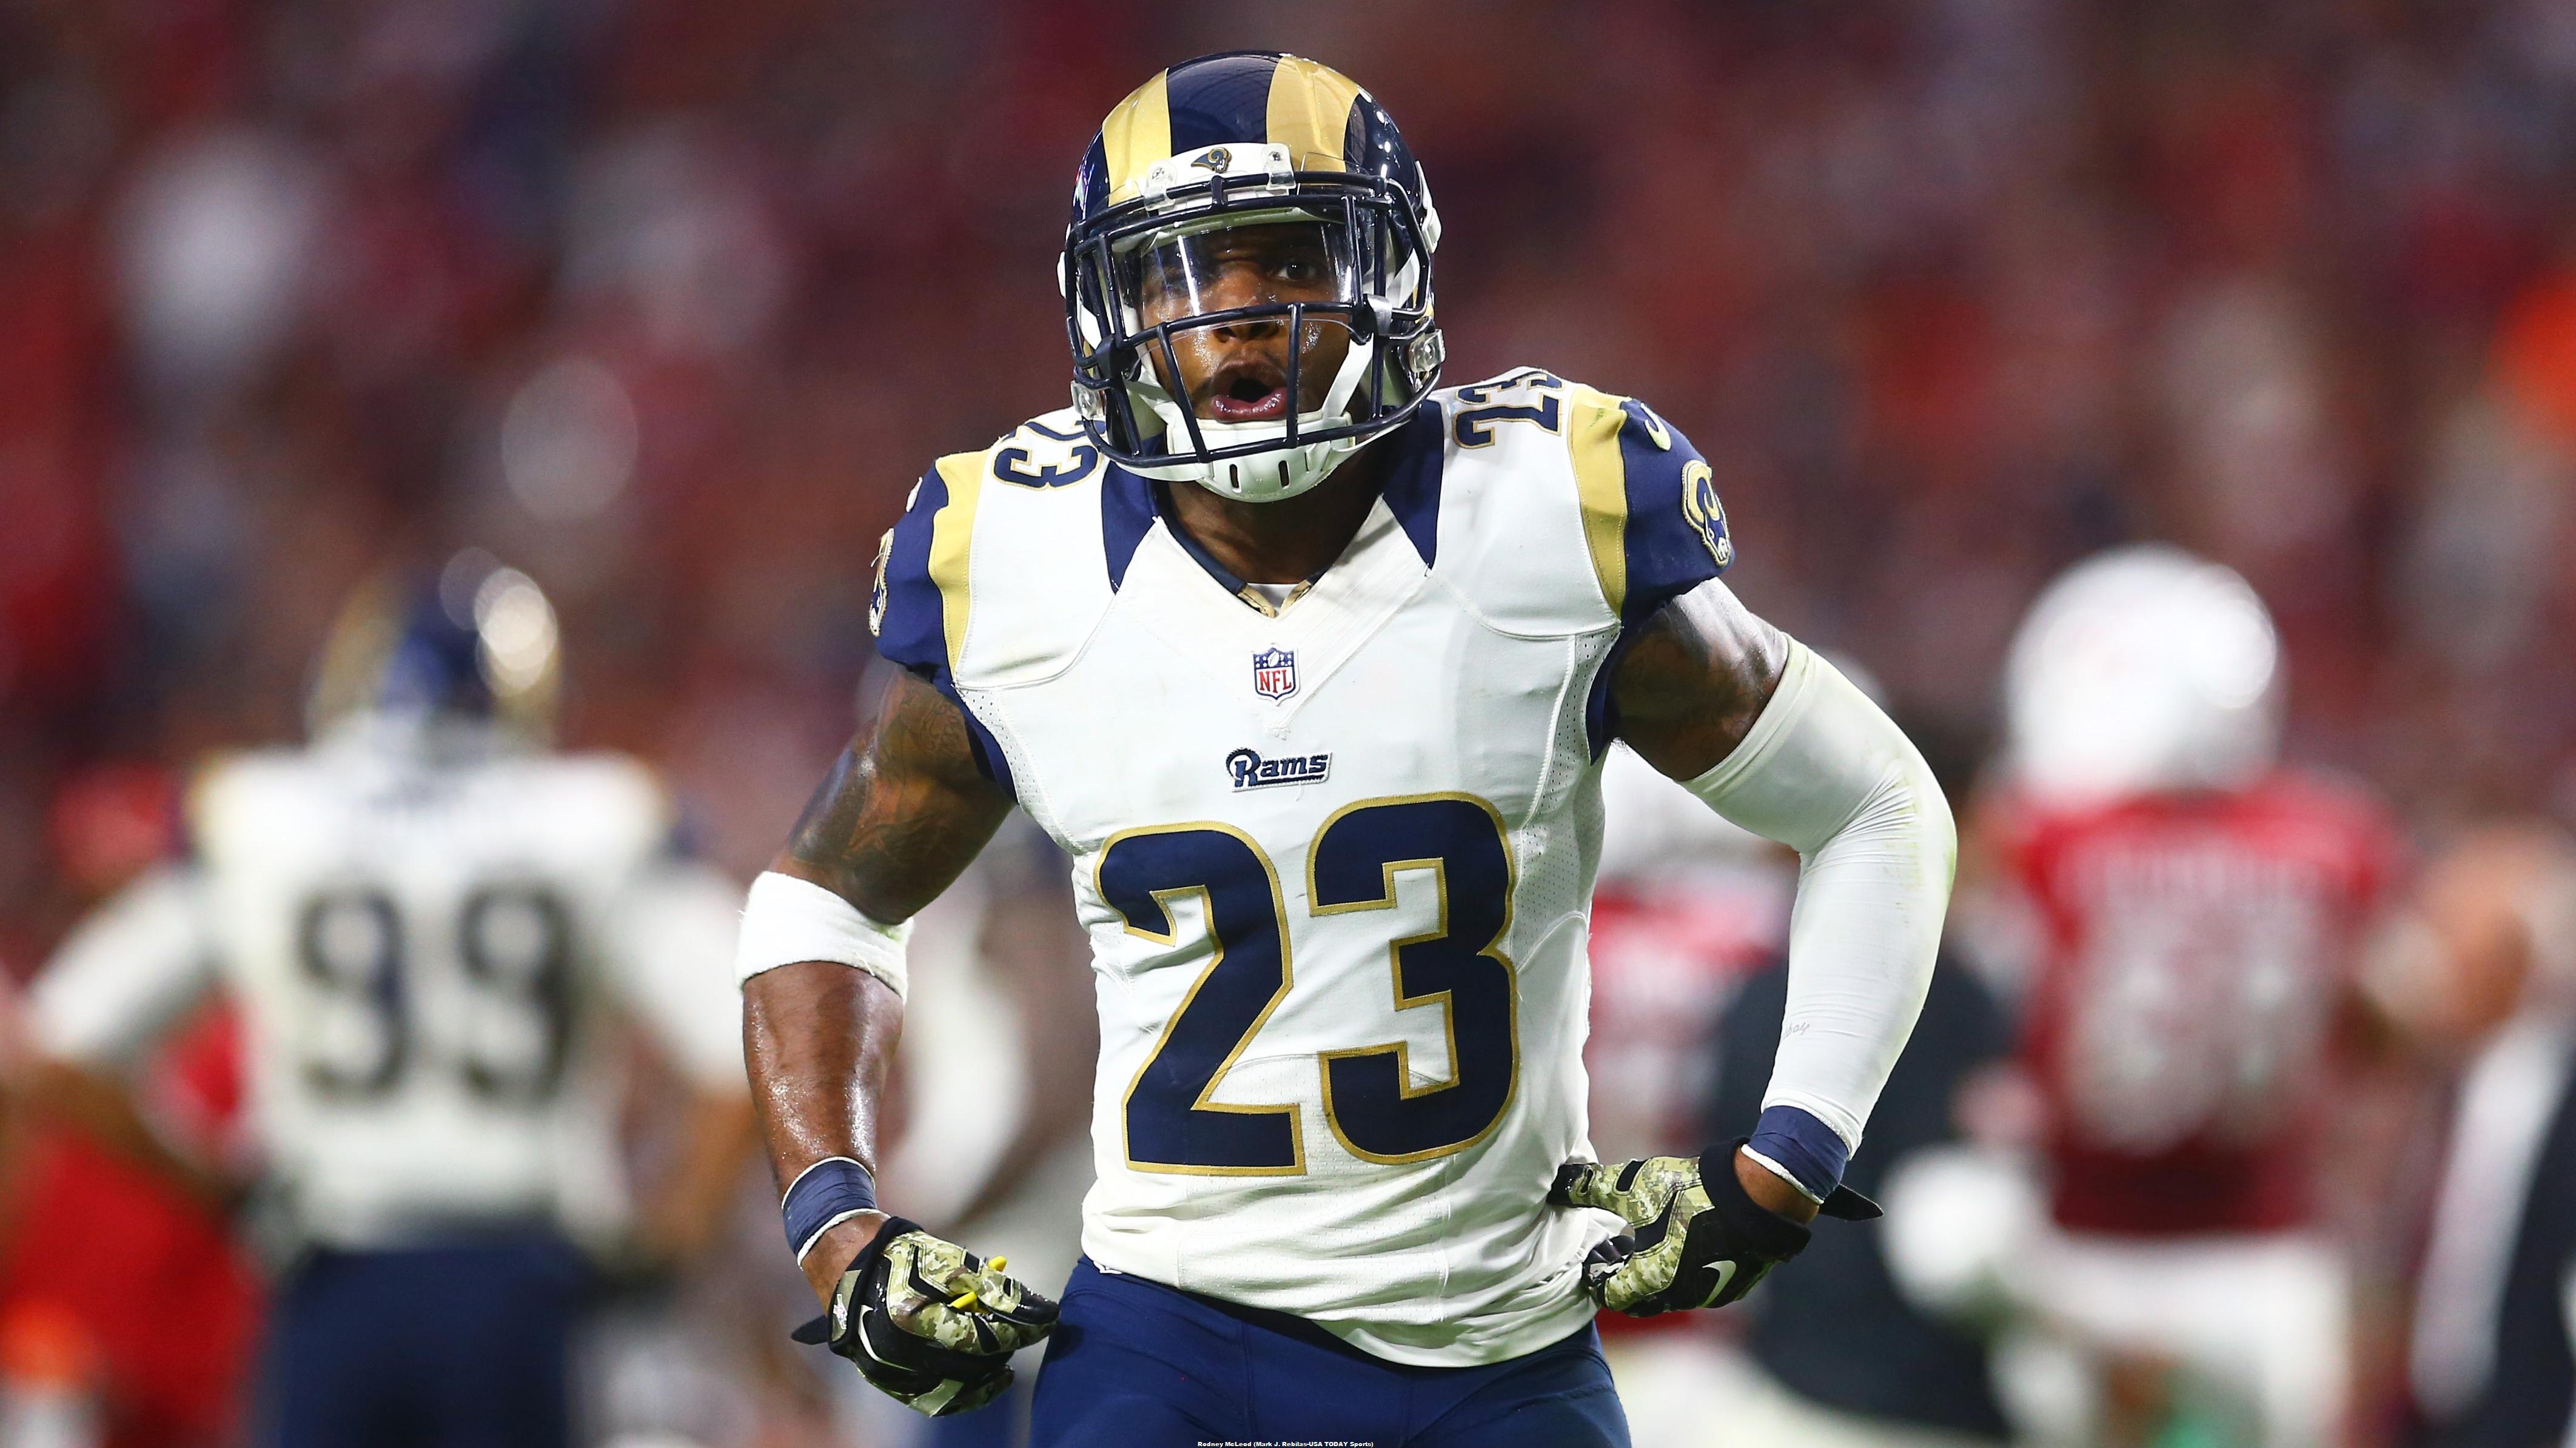 Rams coach Fisher: I'm glad I'm not wearing the Color Rush uniform 